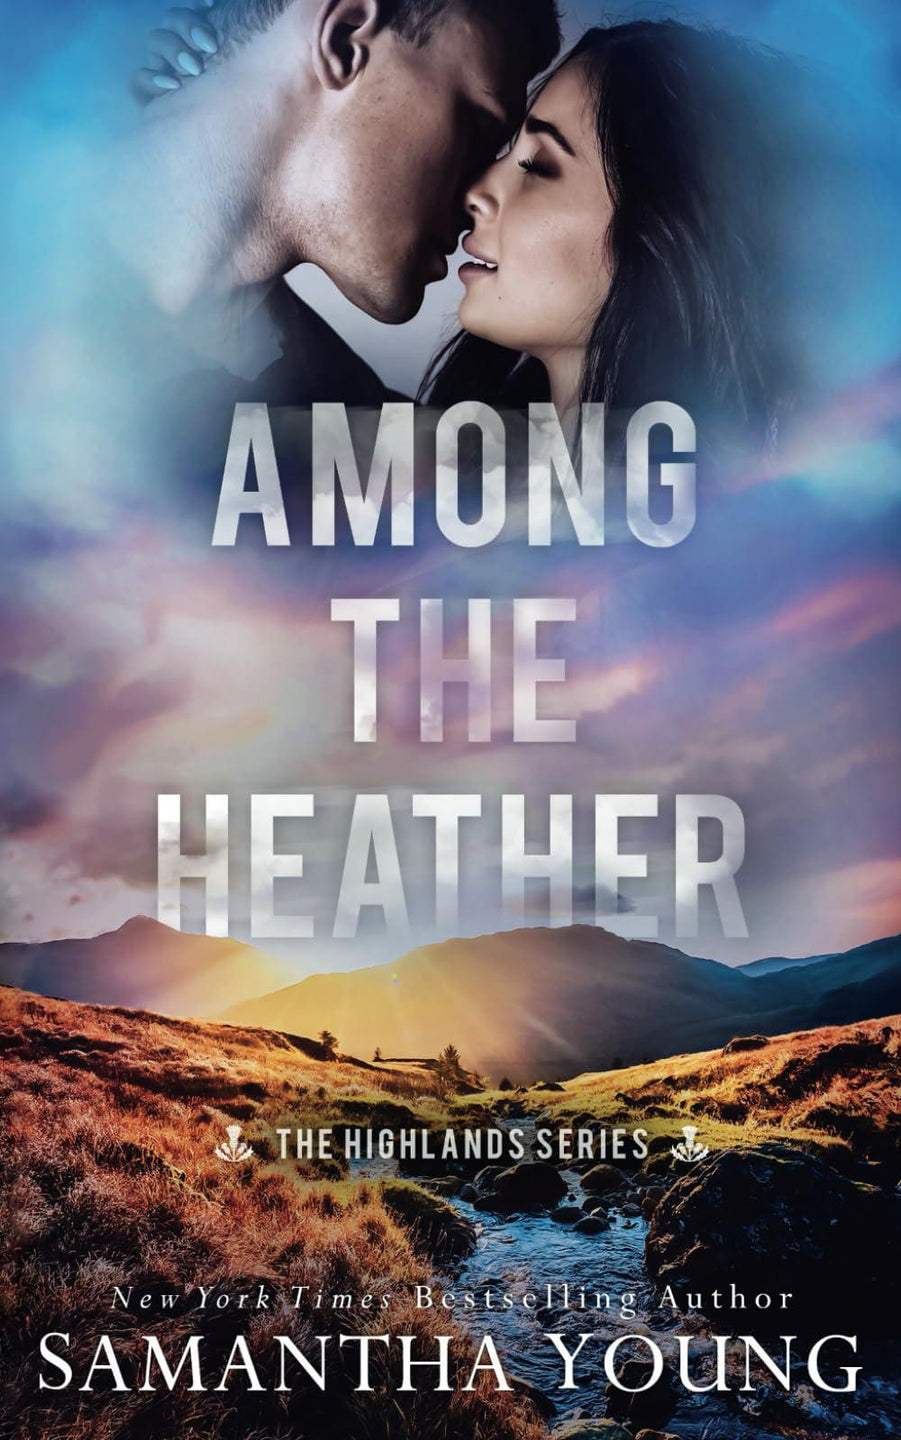 Among the Heather (The Highlands Series #2) (Paperback)